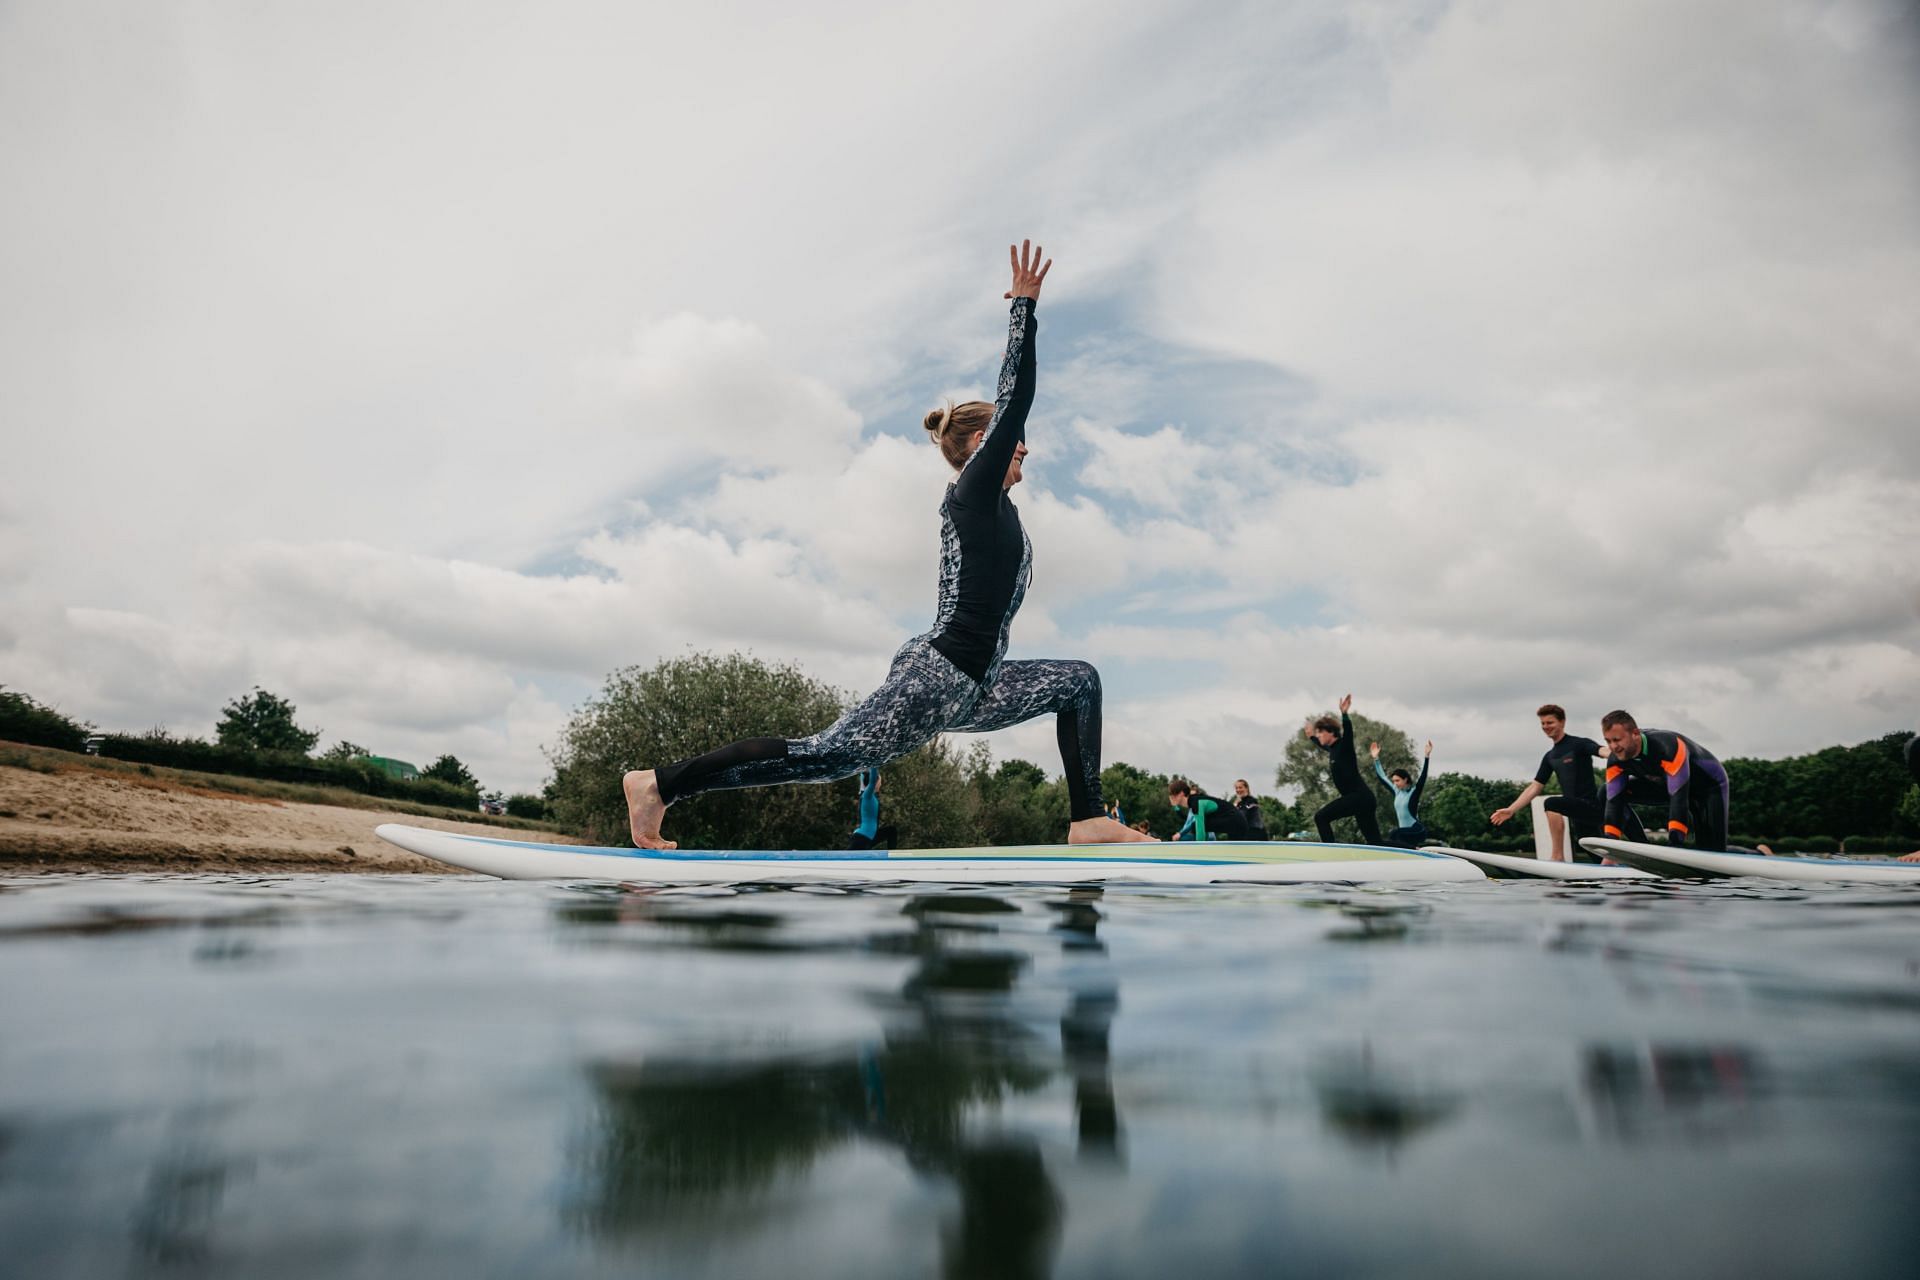 Learn about SUP yoga and connect with nature like never before.  (Image credits: Unsplash/Joppe Spaa)